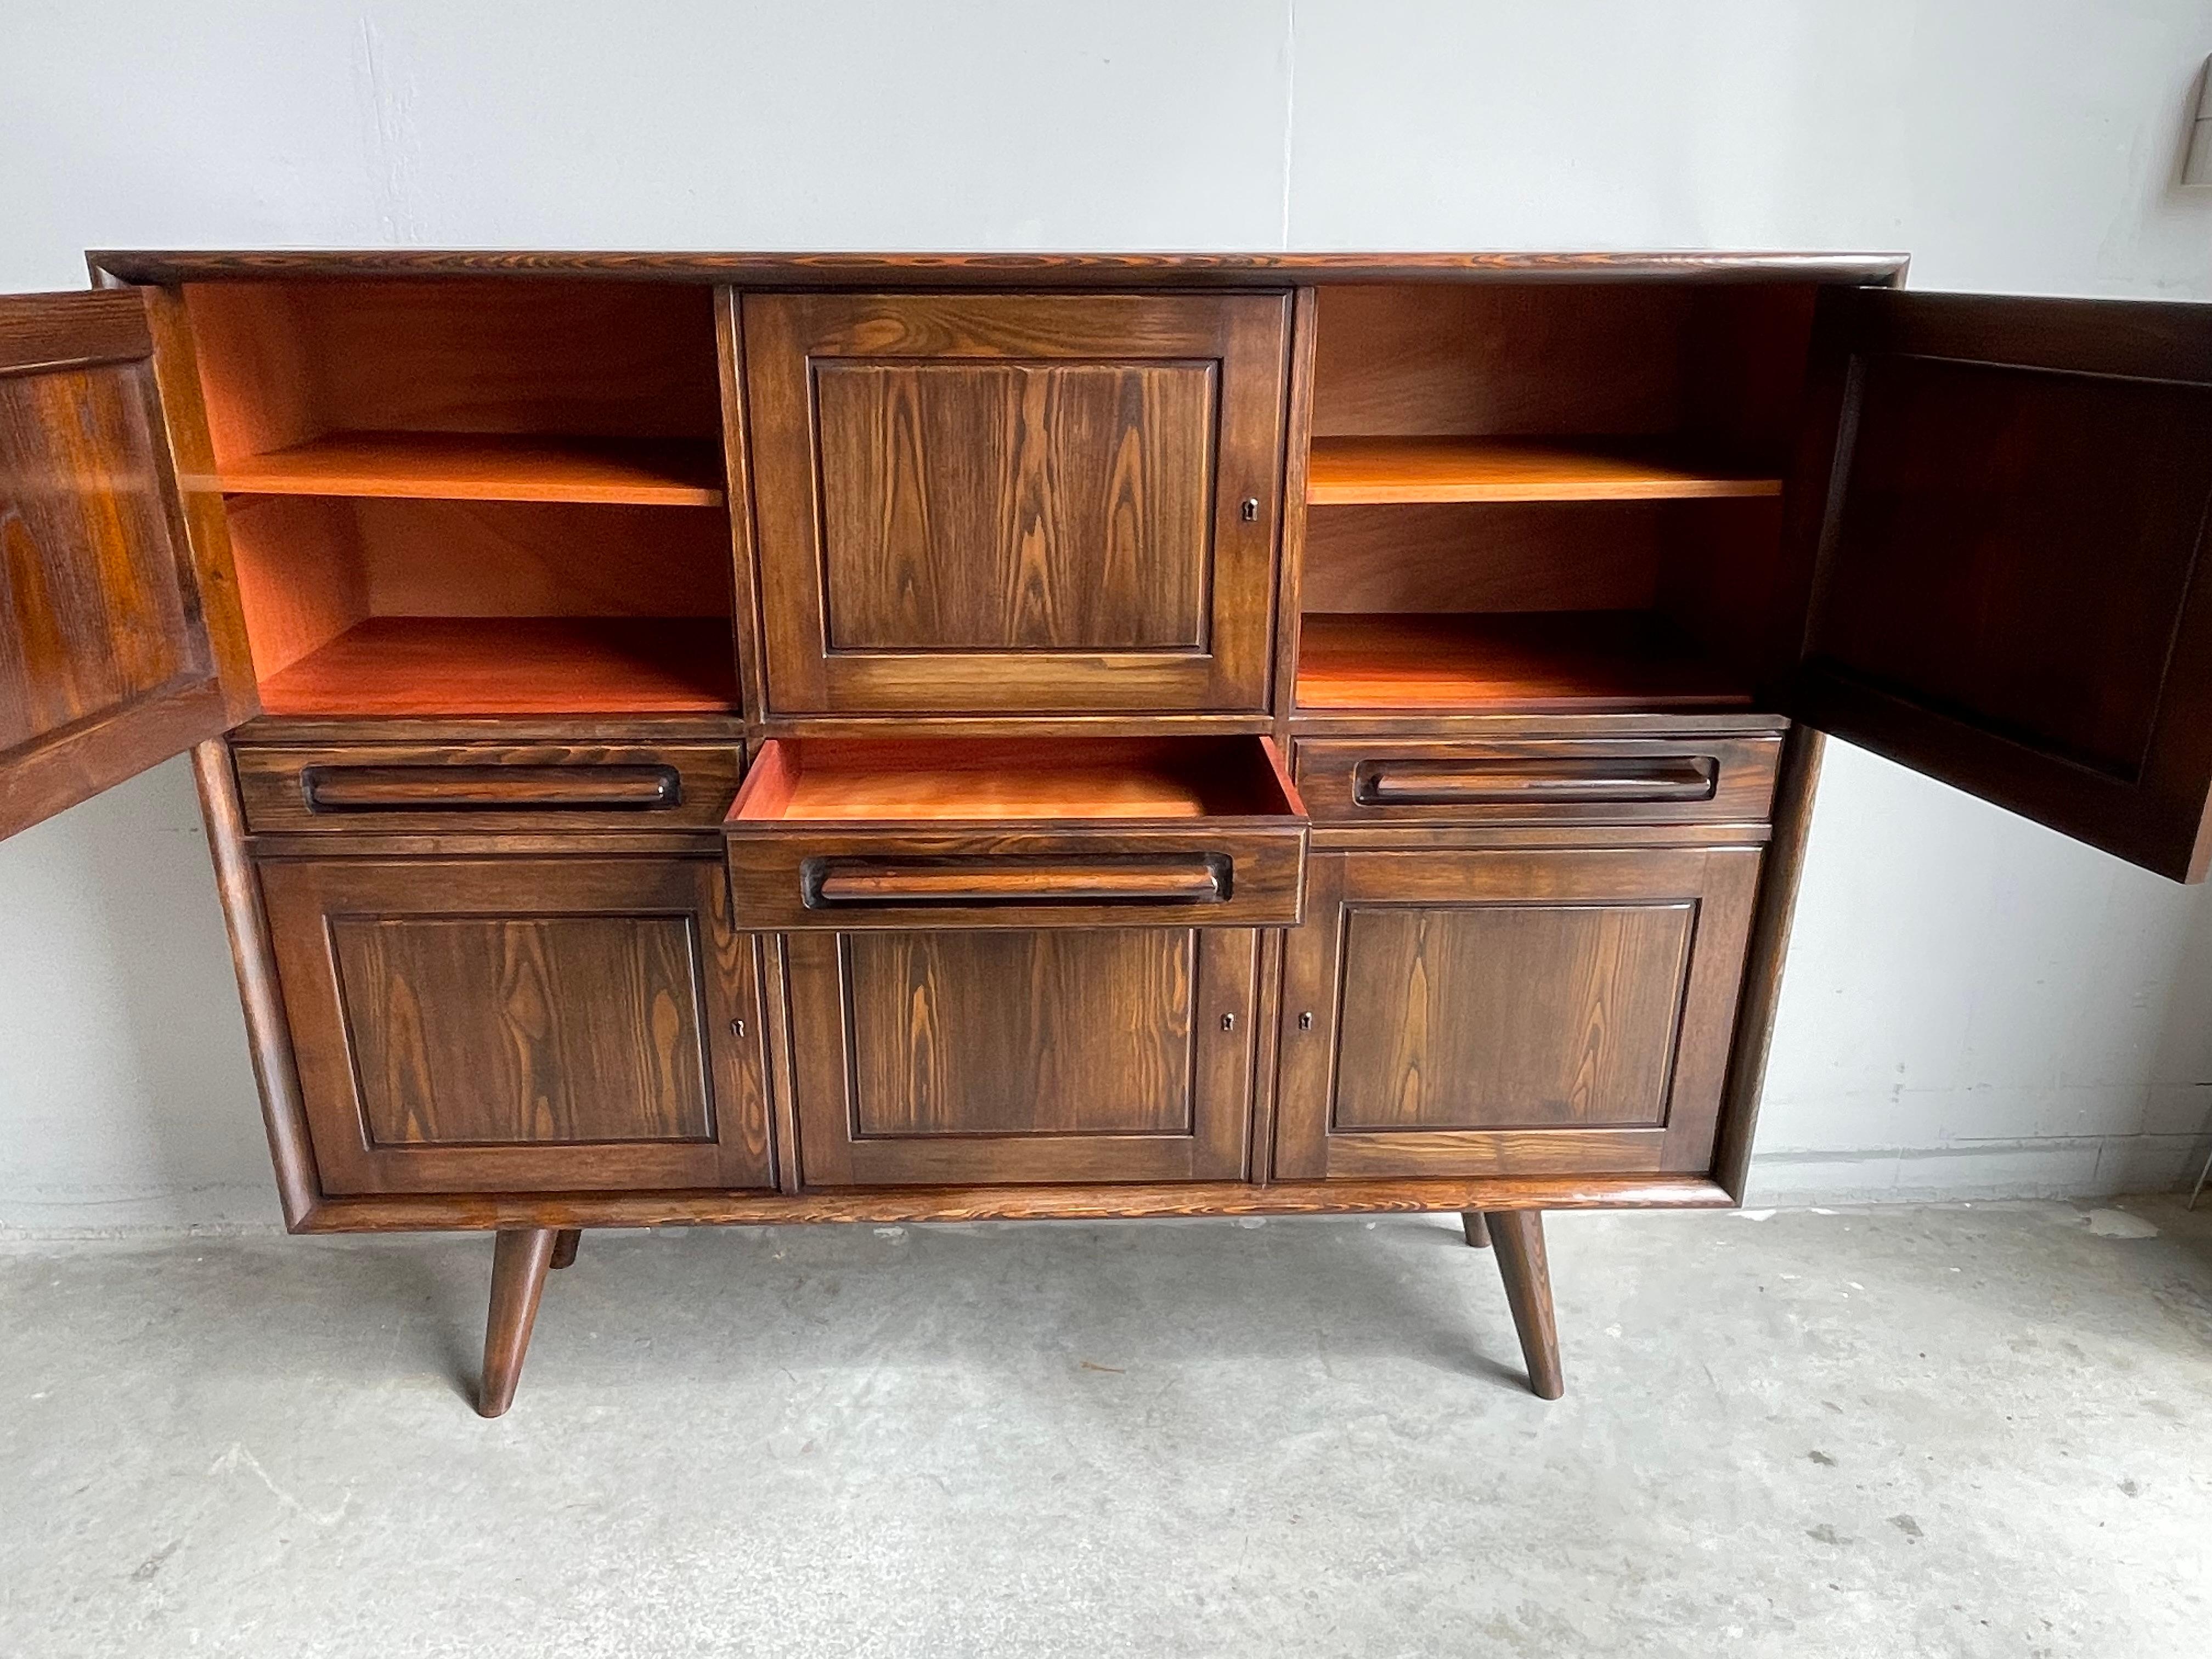 Cast Very Rare Mid-Century Modern Sideboard / Credenza by 't Woonhuys of Amsterdam For Sale